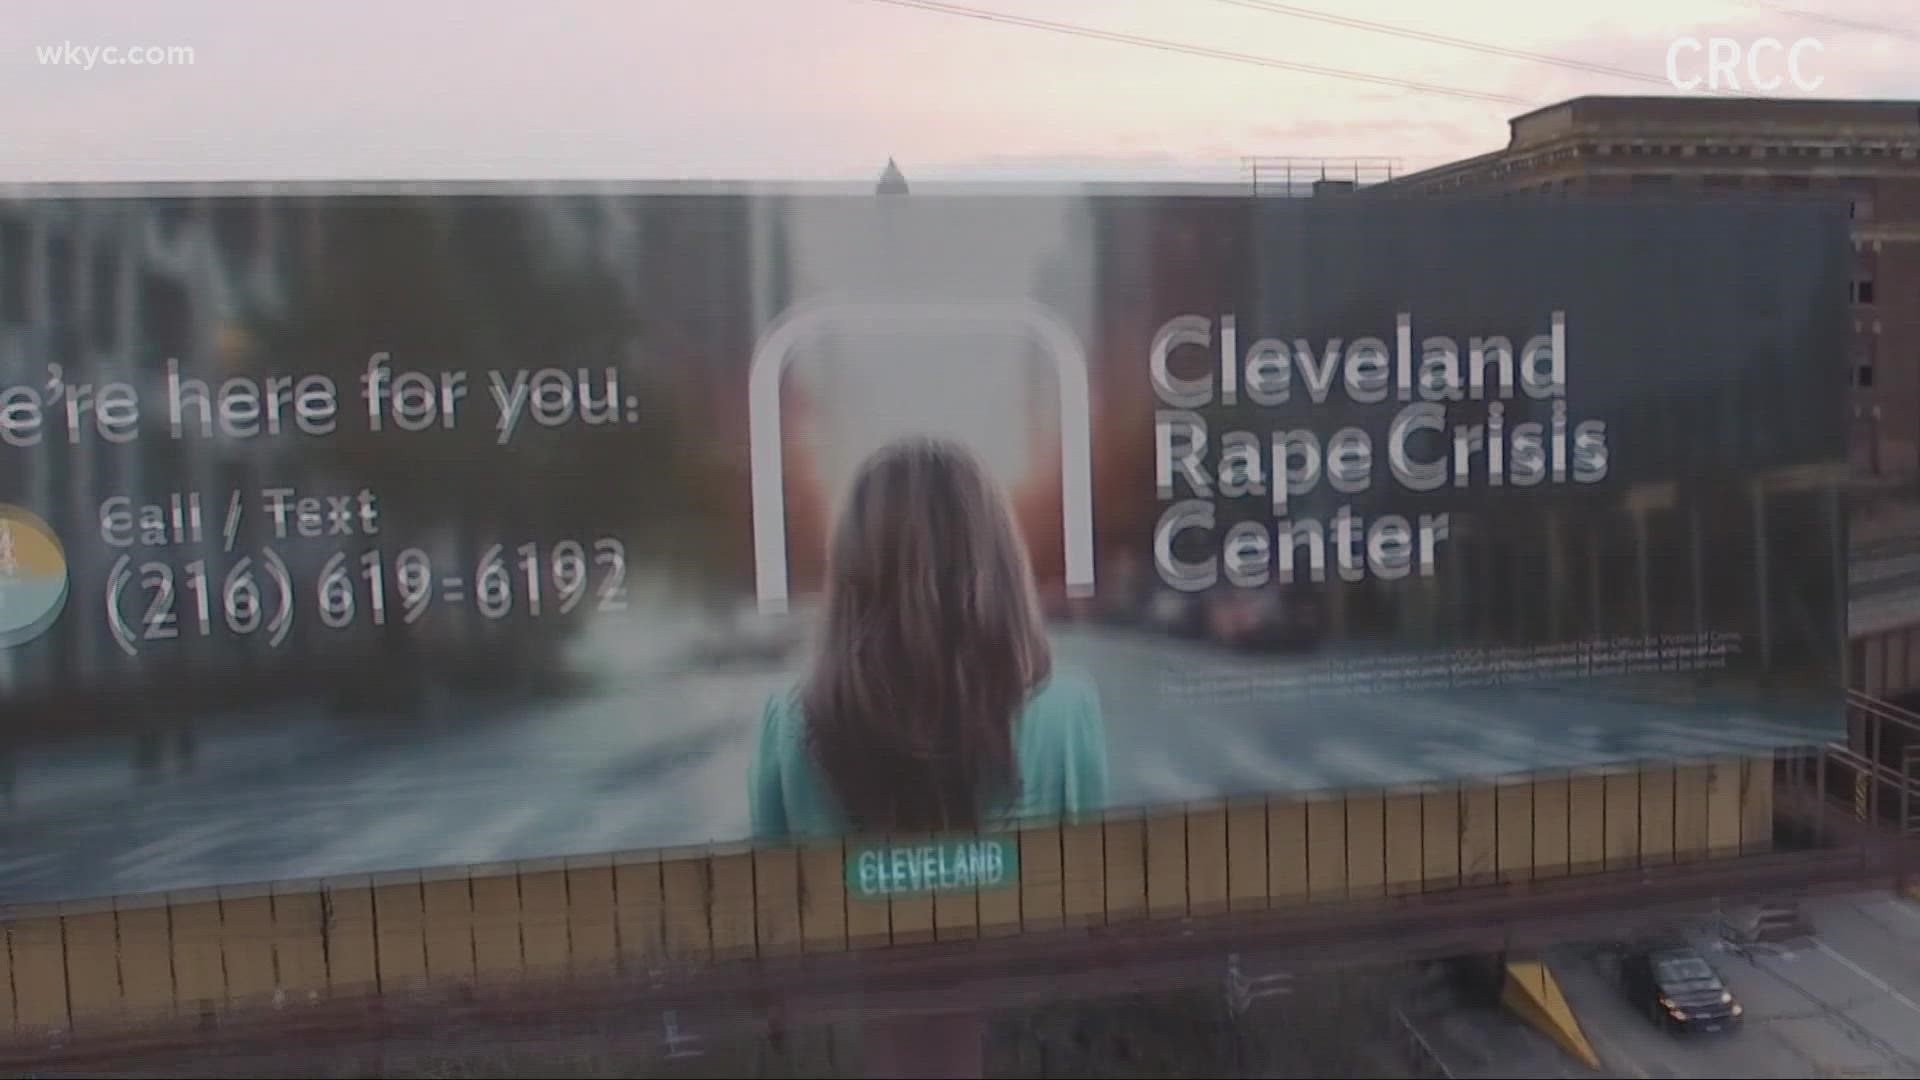 People across the country are sending 22 dollar donations to the Cleveland Rape Center to show support for the women.